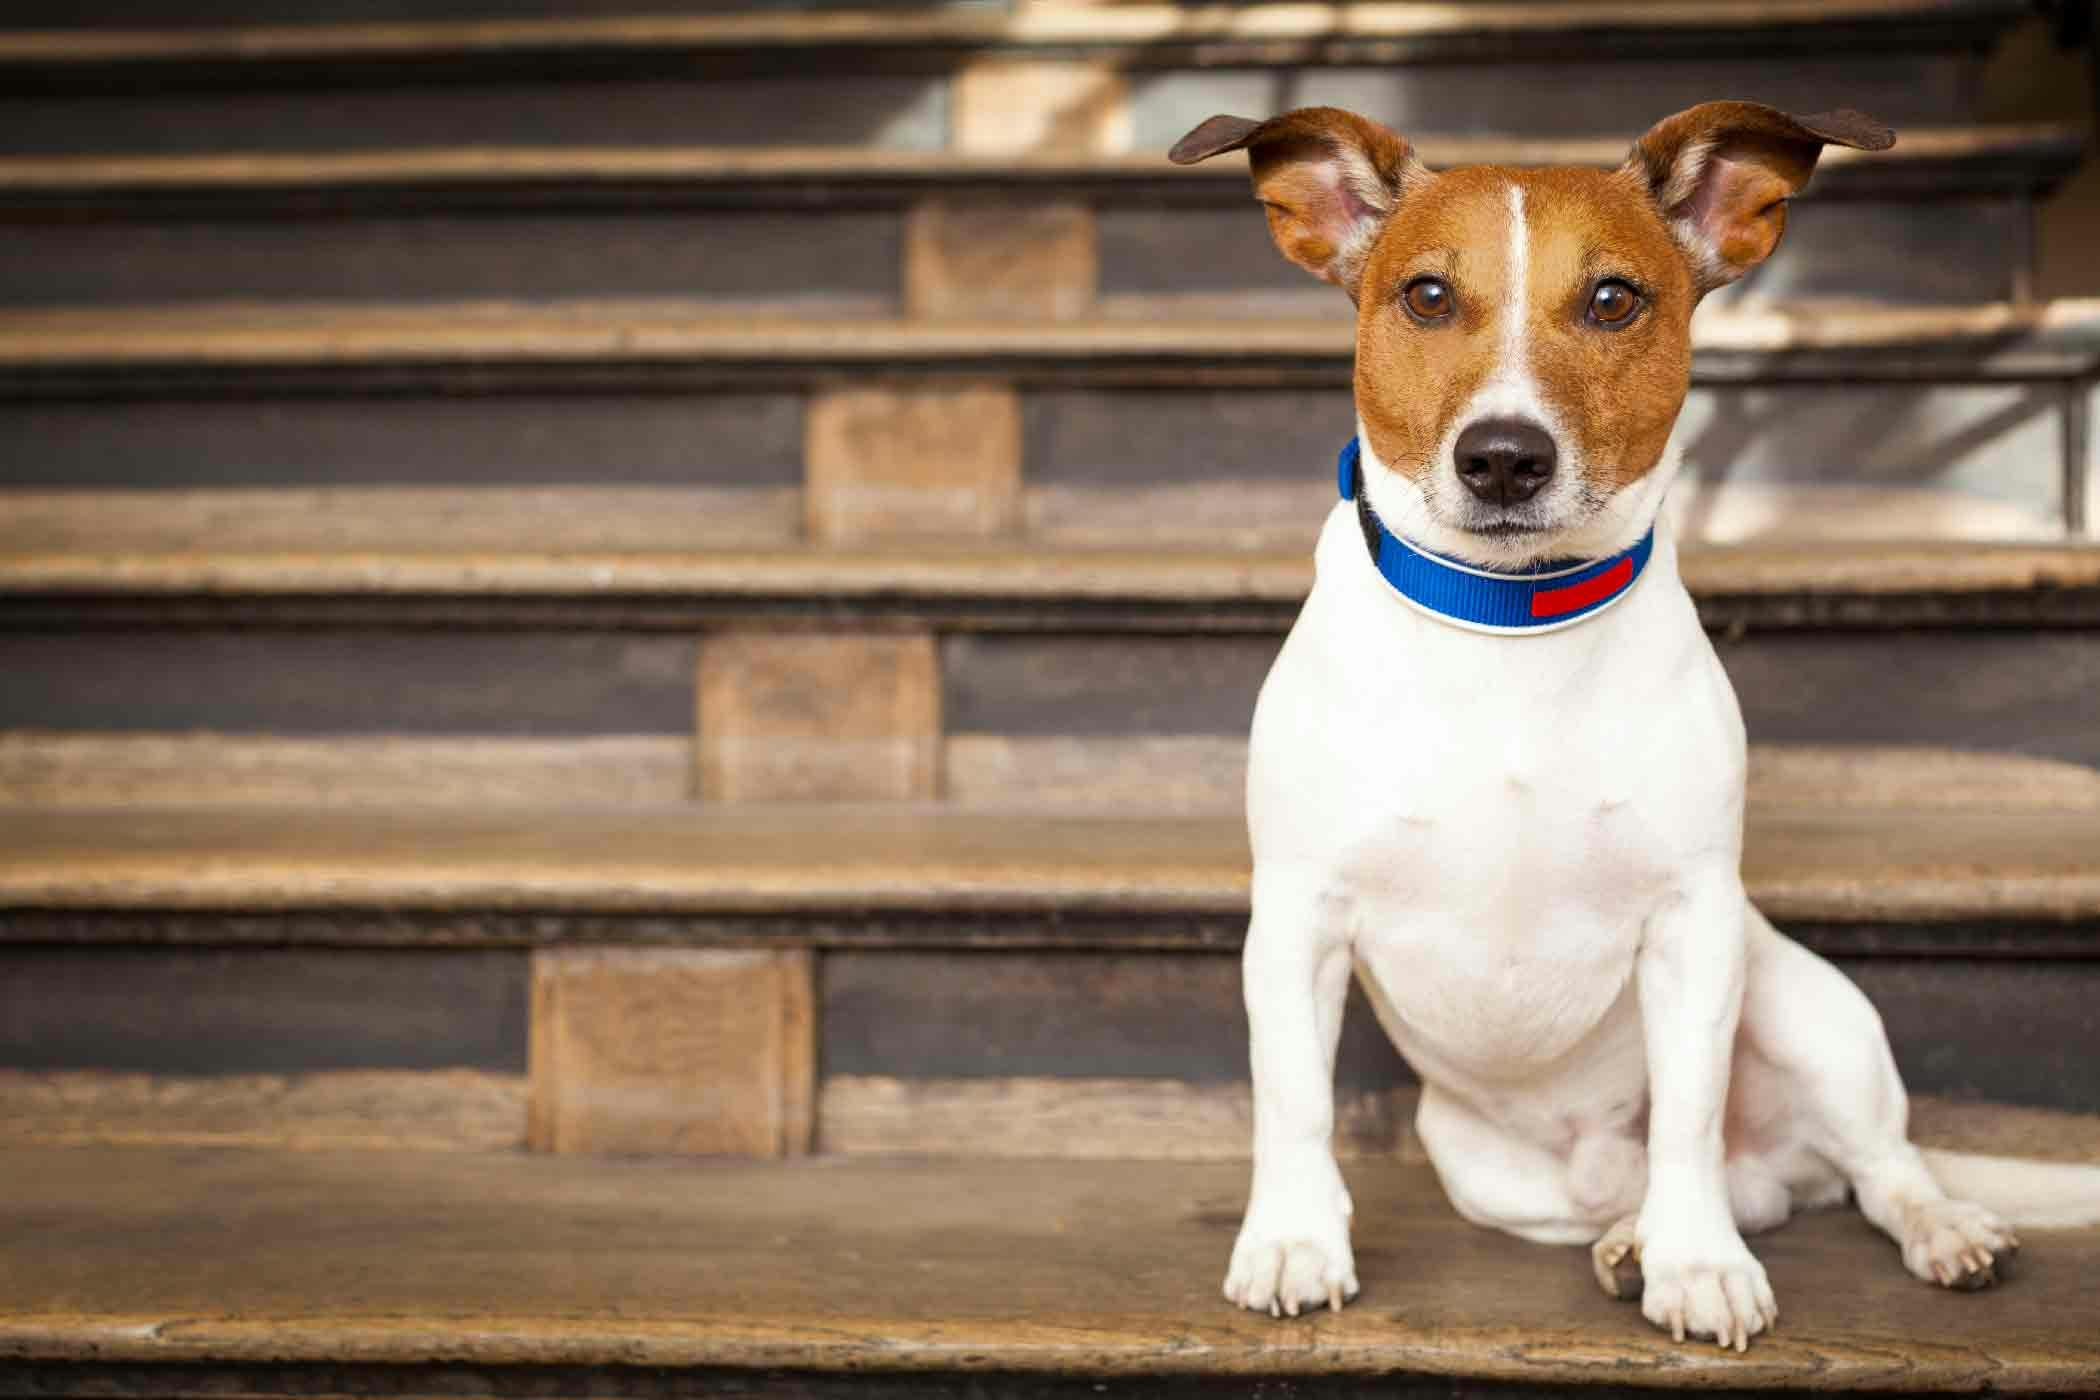 How to Train Your Dog to Go Down Stairs - Wag!